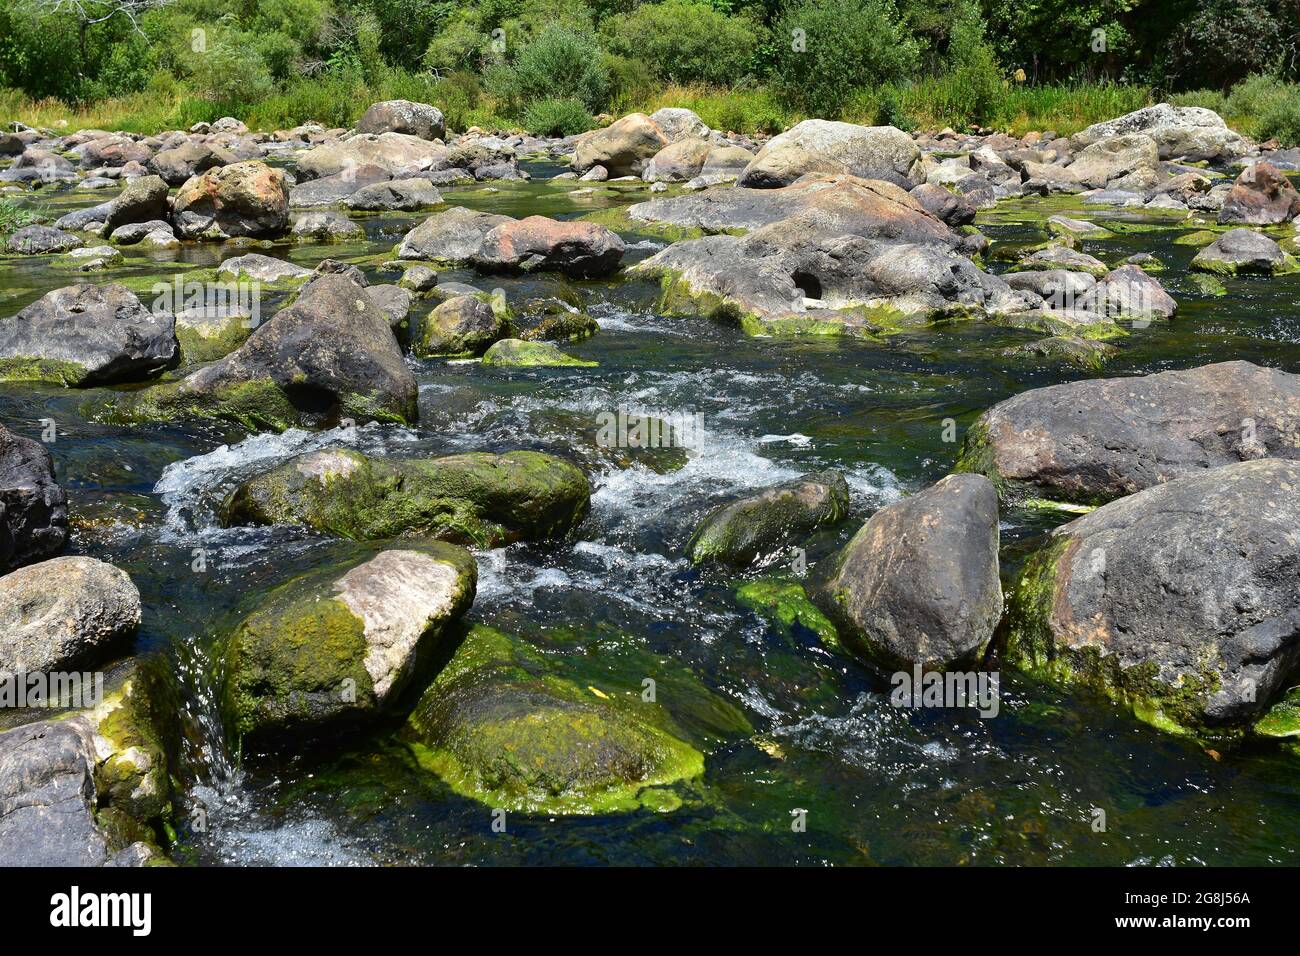 Numerous boulders in shallow clear river full of green algae growth. Stock Photo